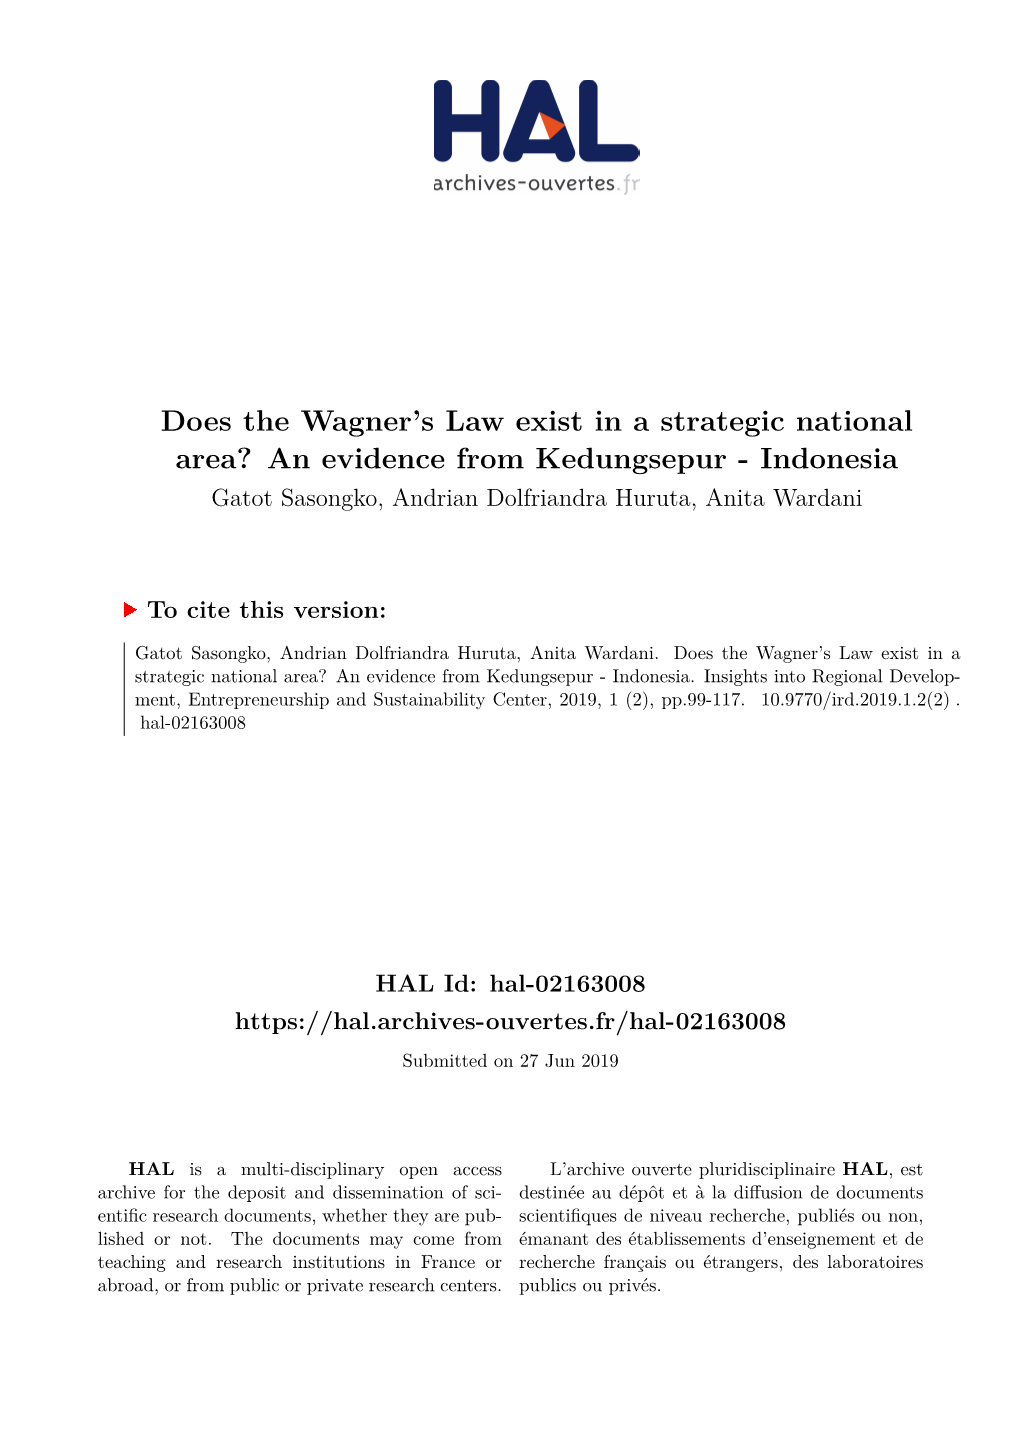 Does the Wagner's Law Exist in a Strategic National Area?